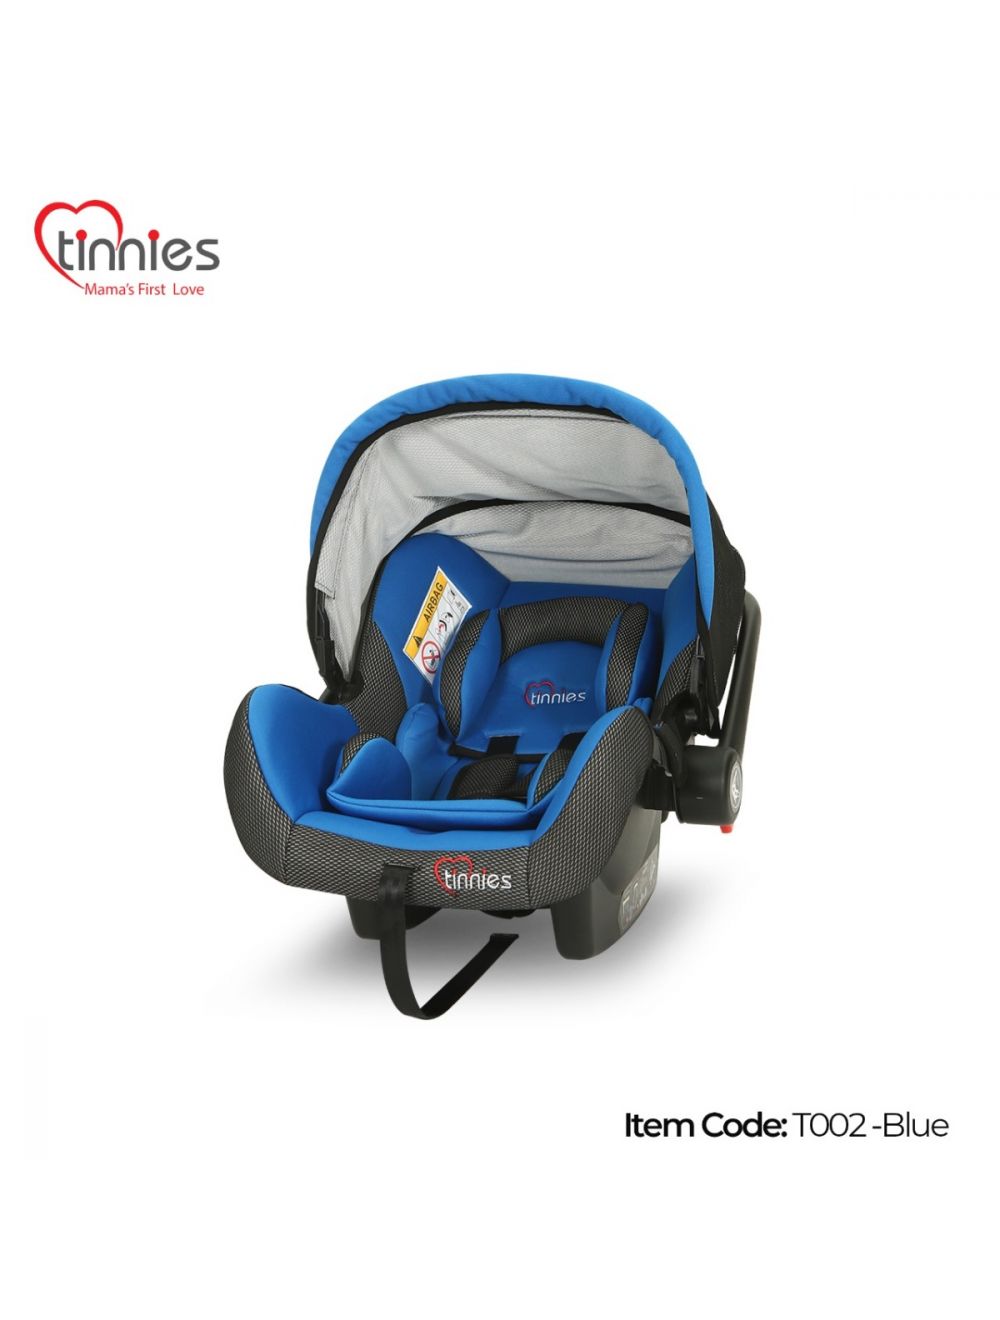 TINNIES BABY CARRY COT Blue